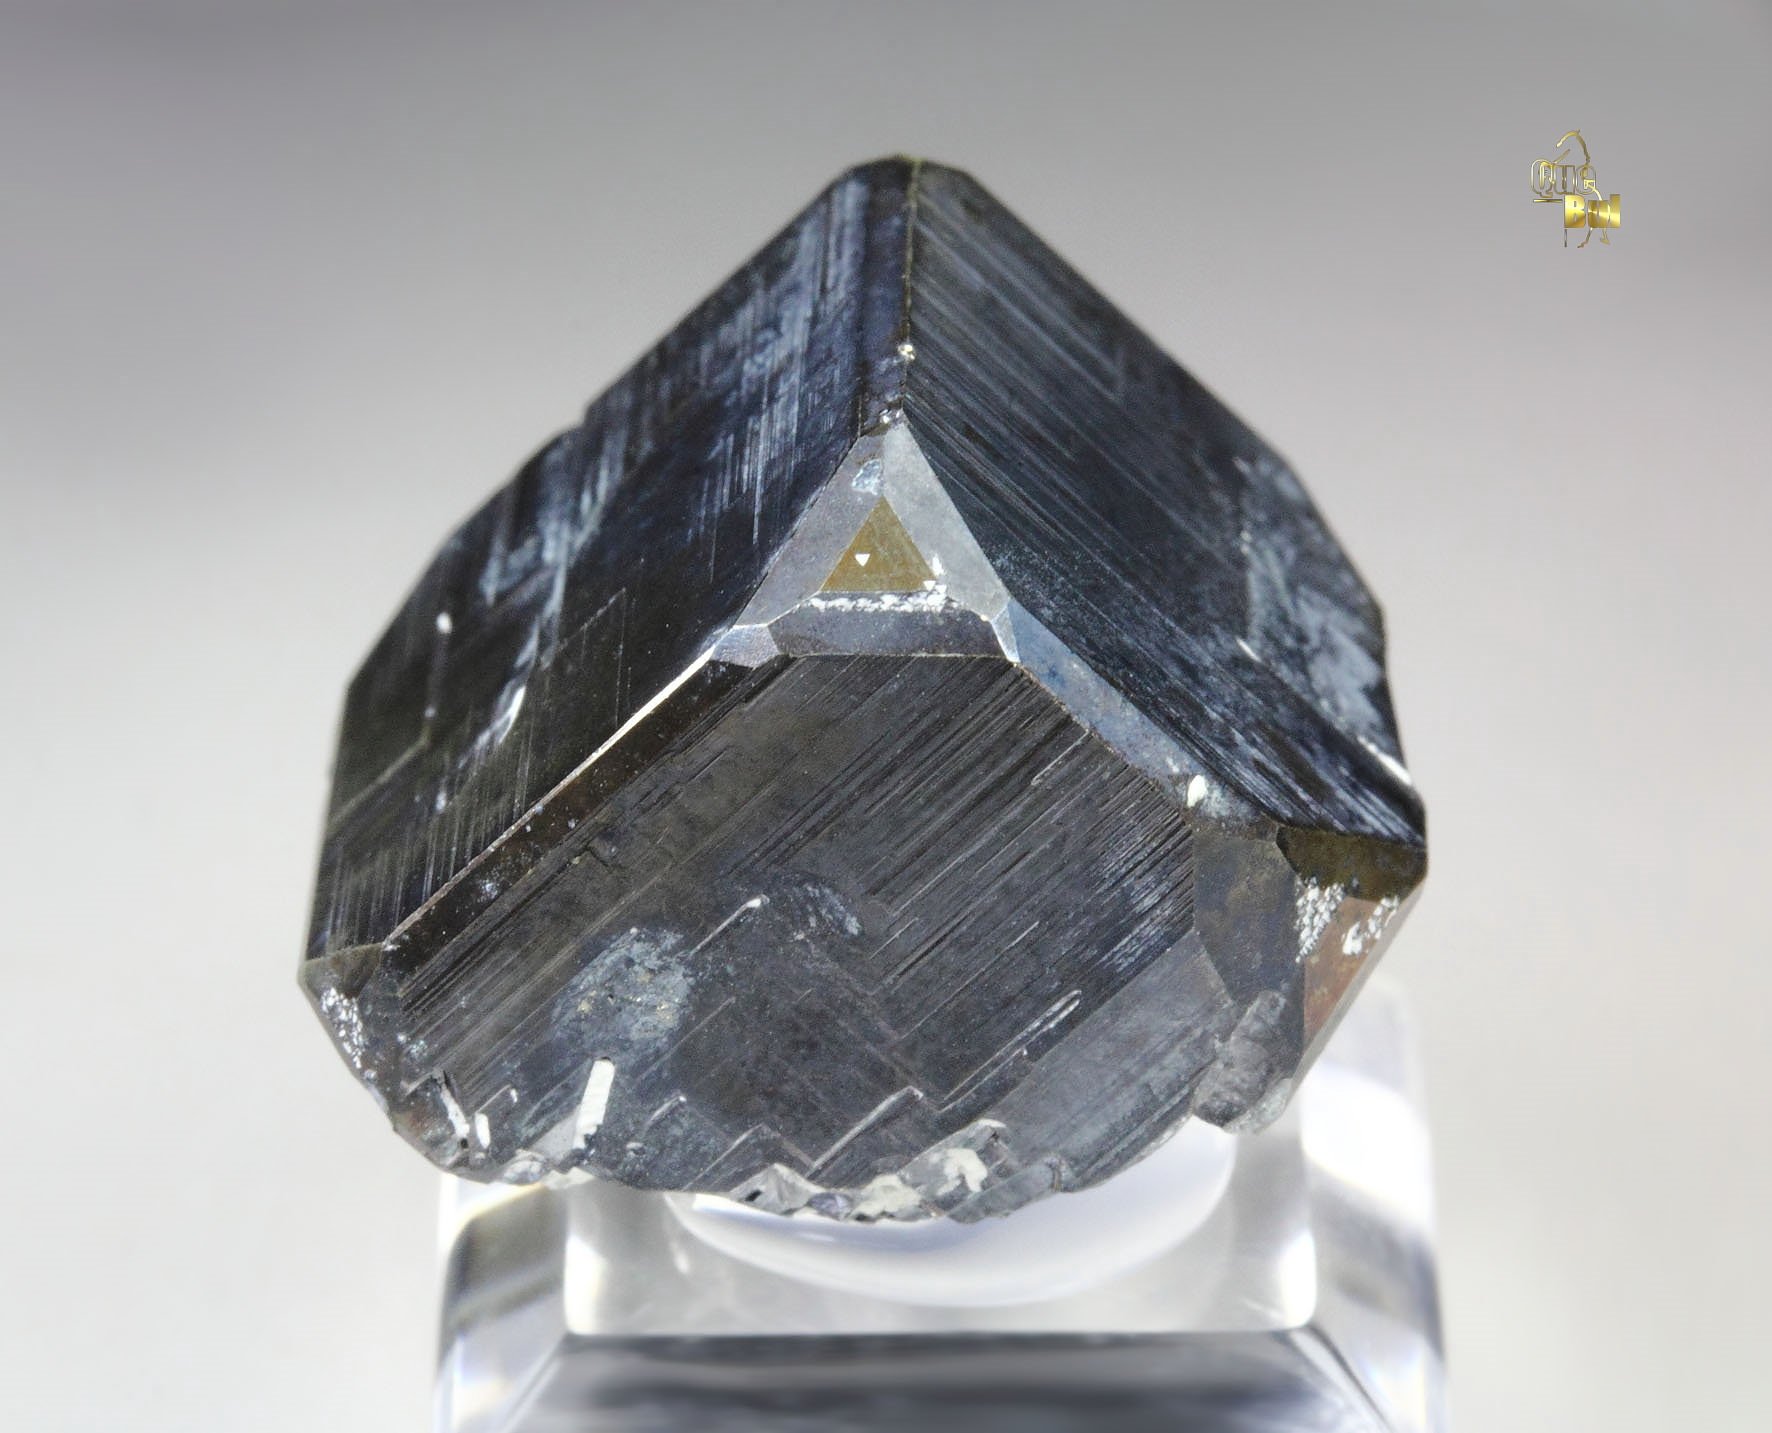 PYRITE with CHALCOCITE coating